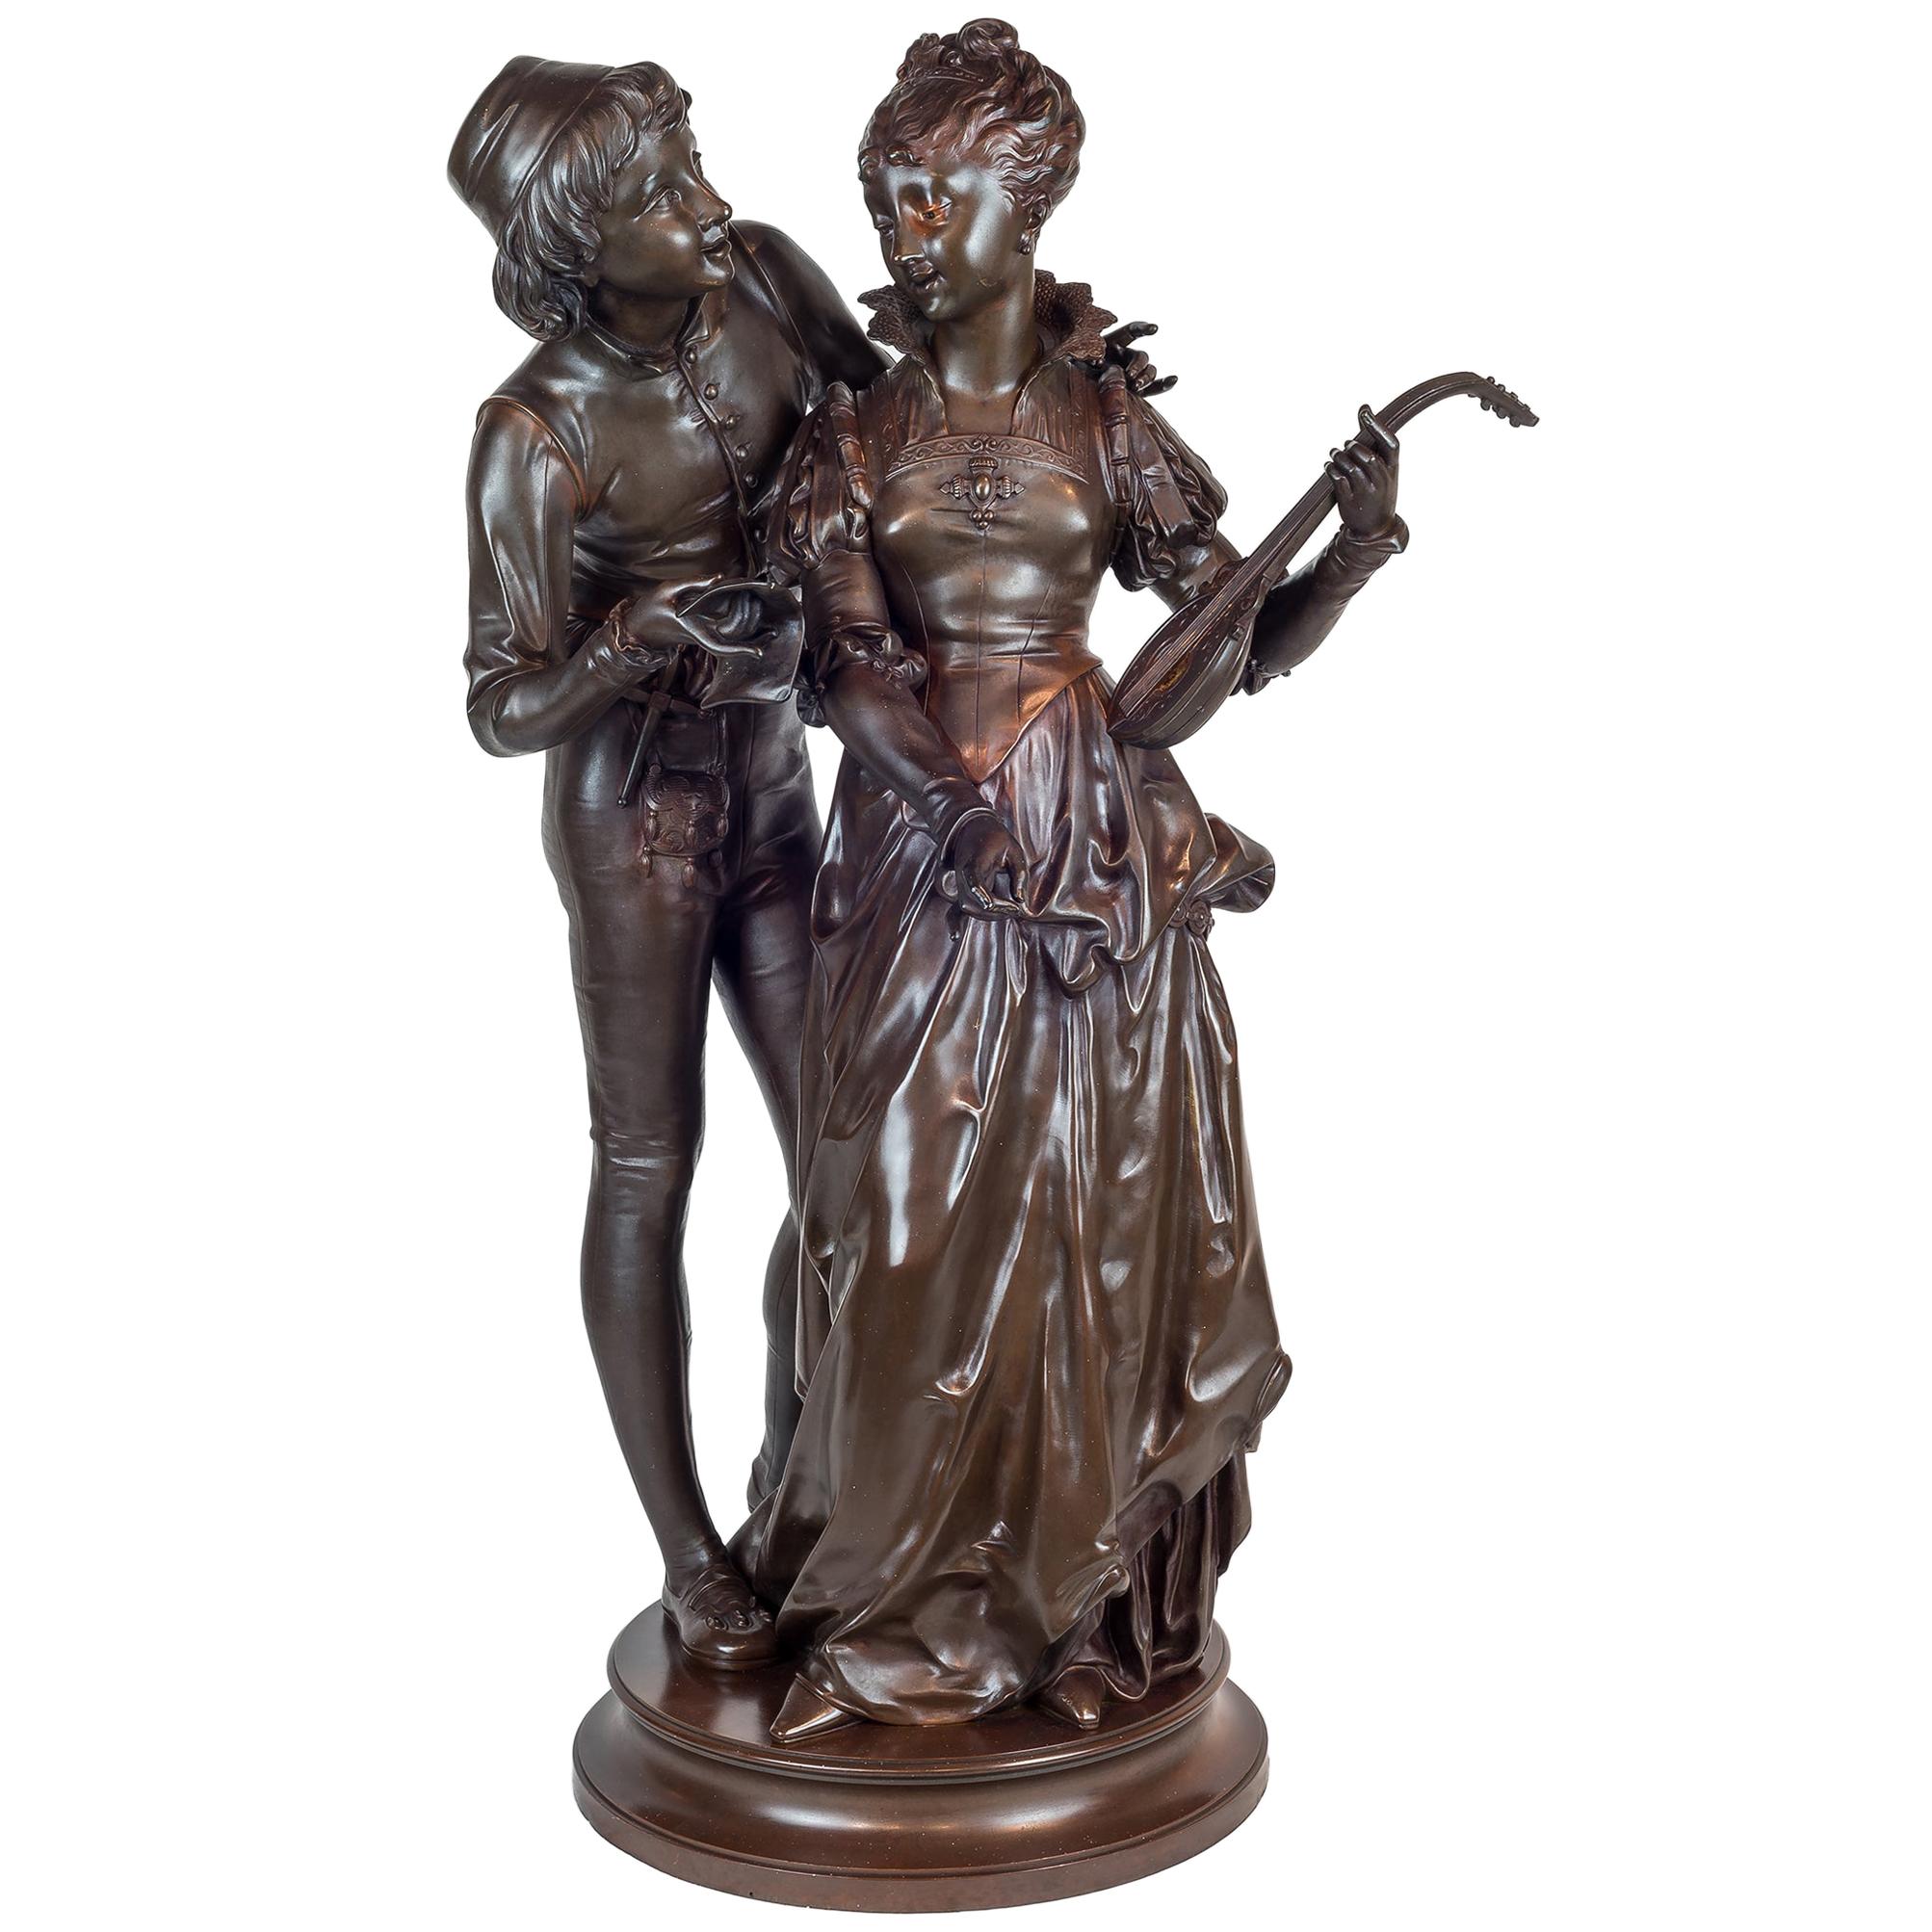 Patinated Bronze Sculpture of Two Lovers by Vincent Faure de Brousse